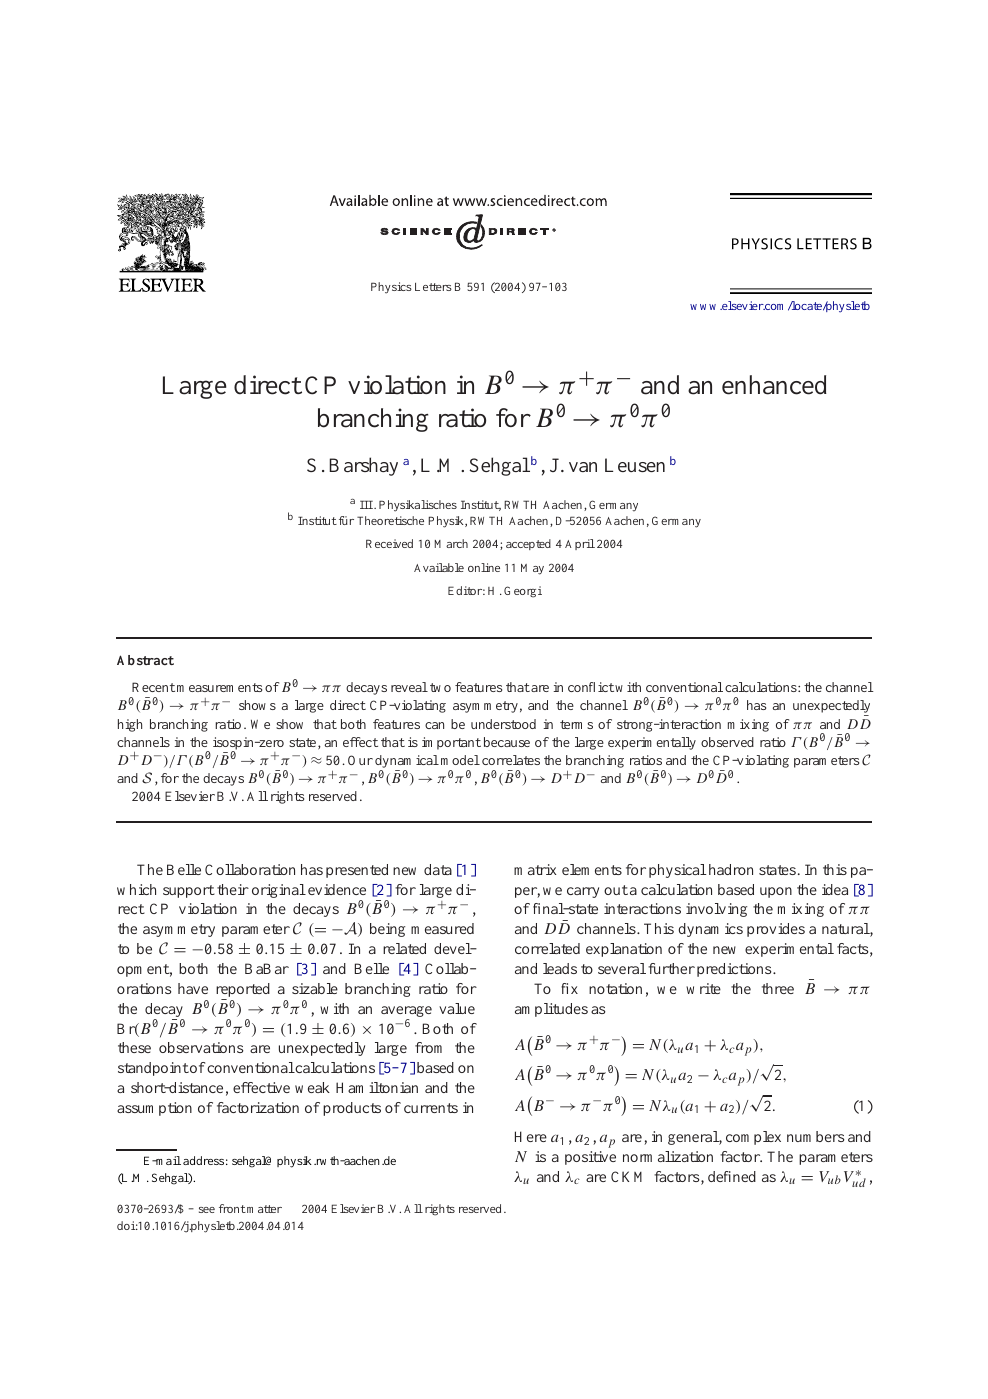 Large Direct Cp Violation In B0 P P And An Enhanced Branching Ratio For B0 P0p0 Topic Of Research Paper In Physical Sciences Download Scholarly Article Pdf And Read For Free On Cyberleninka Open